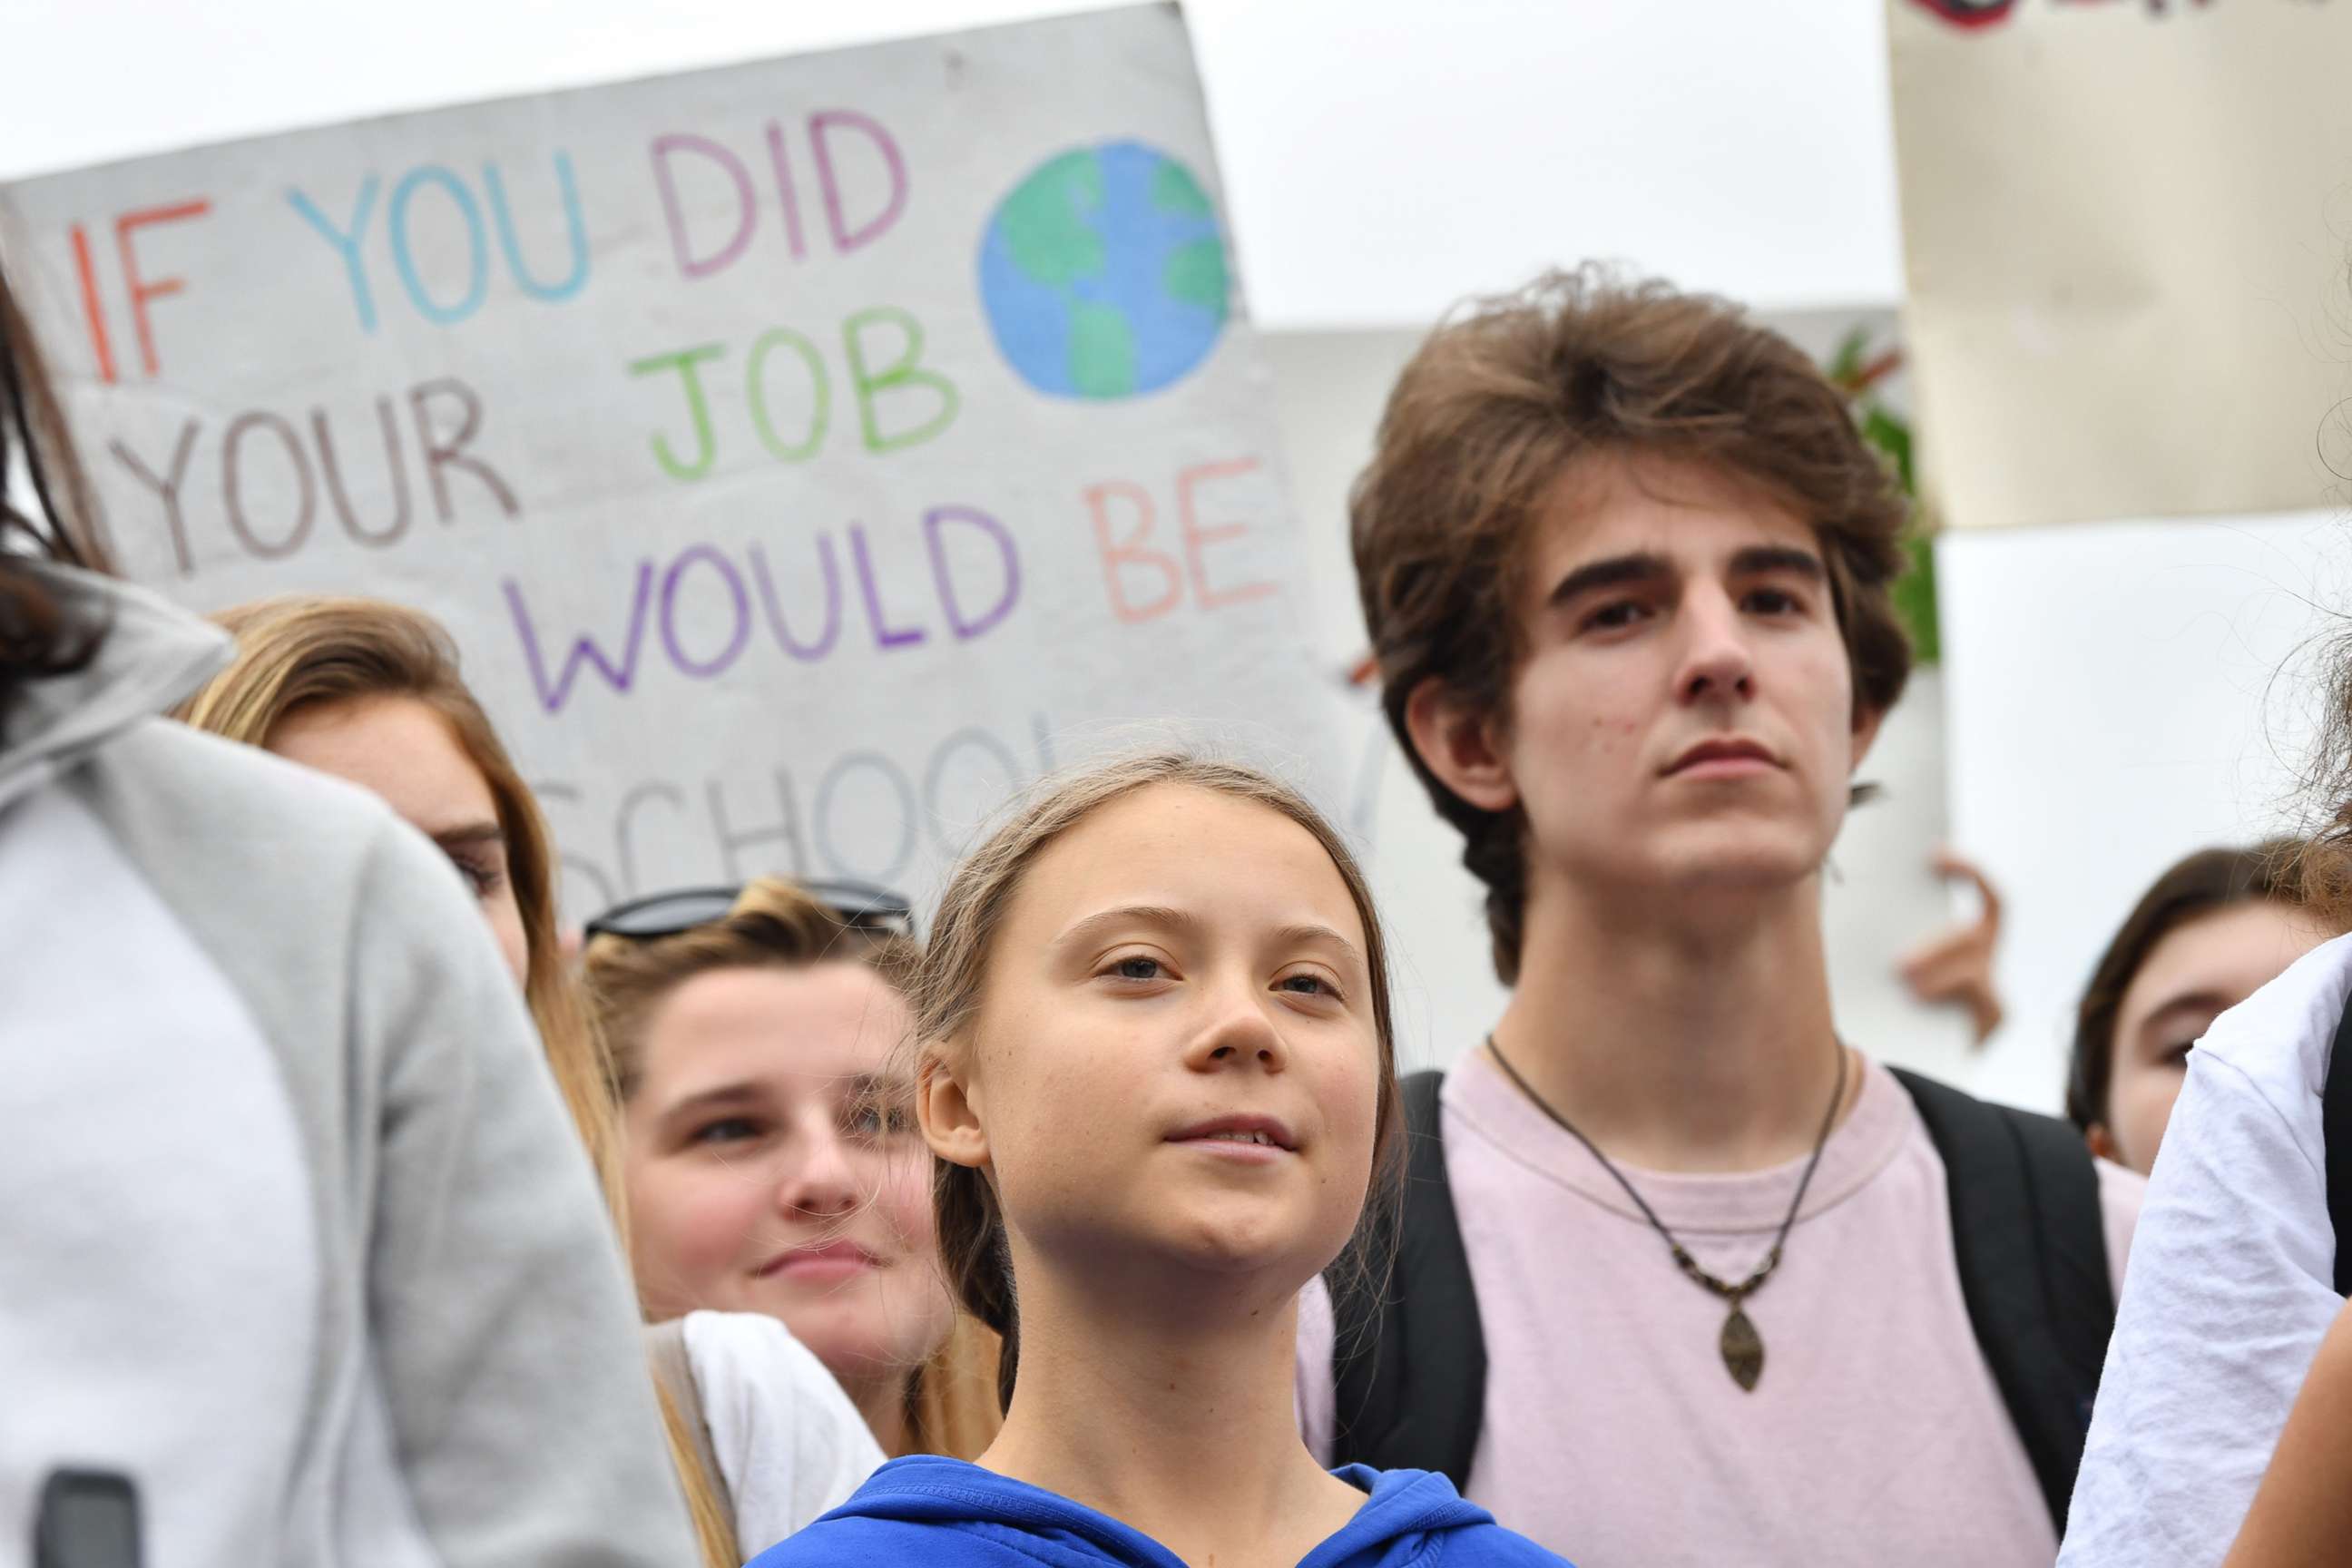 PHOTO: Swedish environment activist Greta Thunberg takes part in a climate protest outside the White House in Washington, D.C. on September 13, 2019.